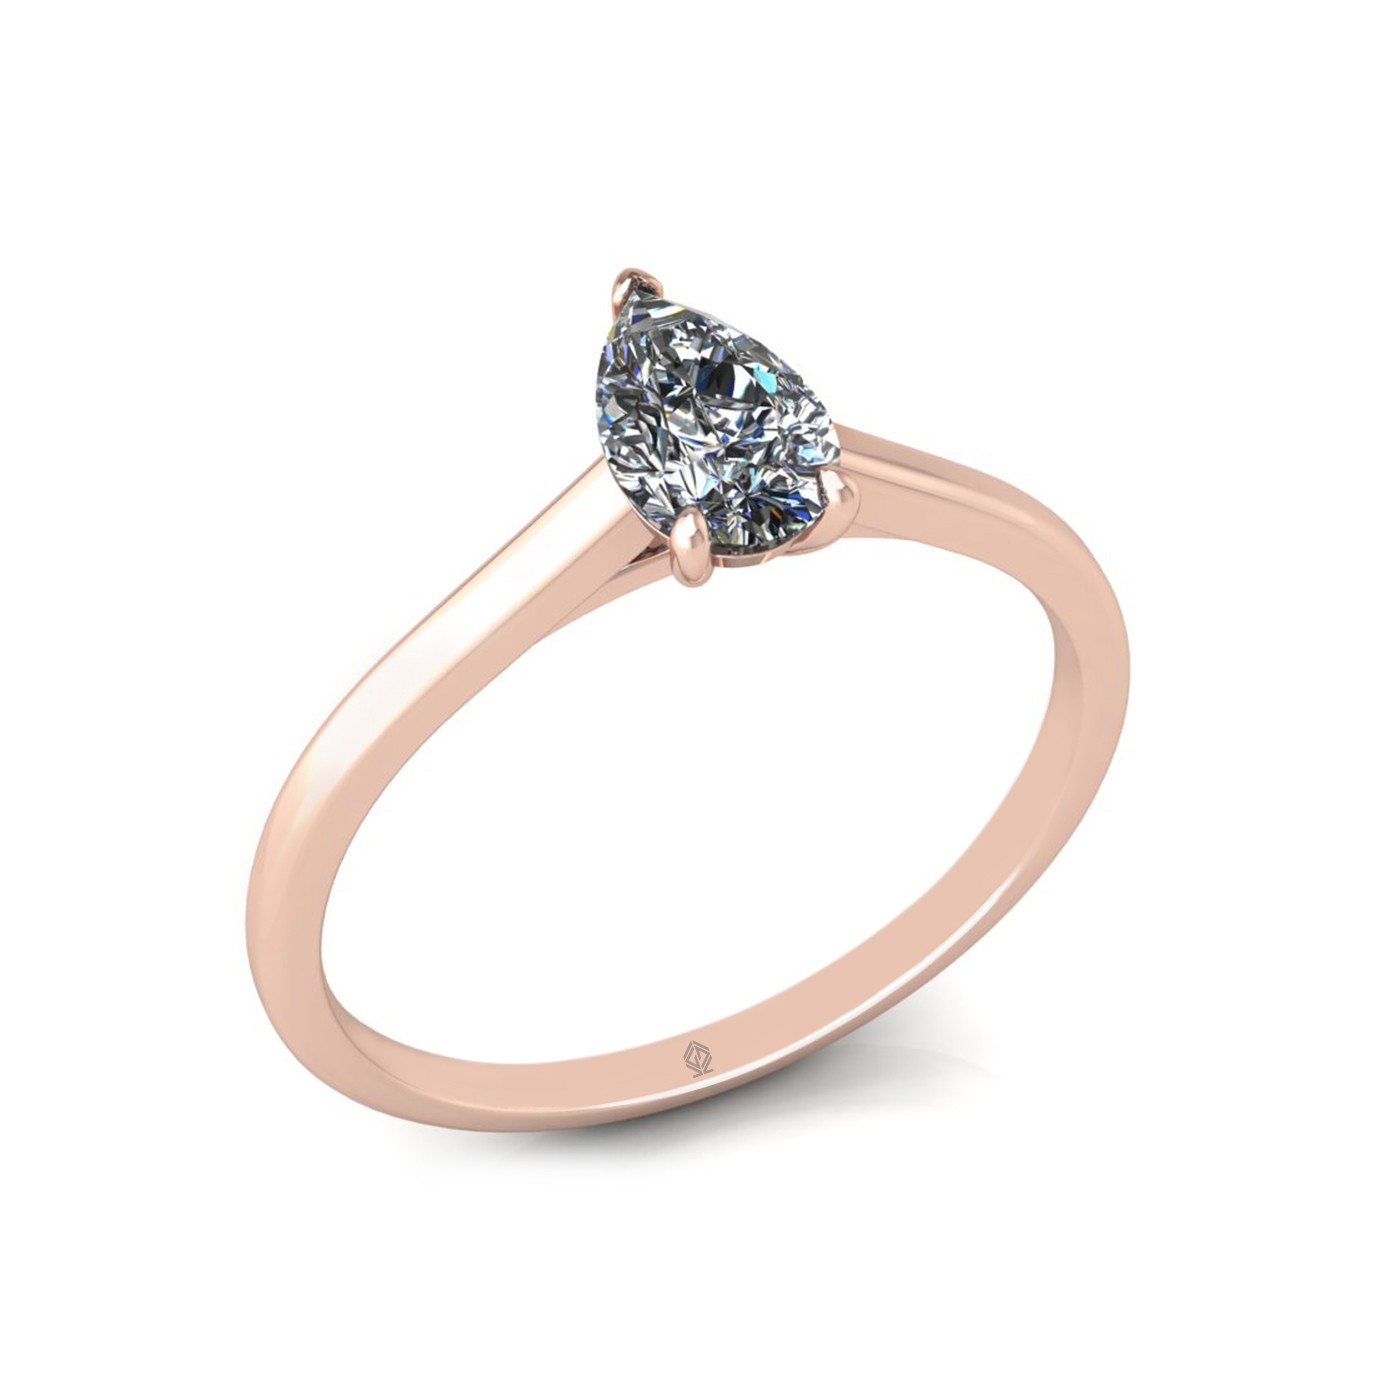 18k rose gold  0,50 ct 3 prongs solitaire pear cut diamond engagement ring with whisper thin band